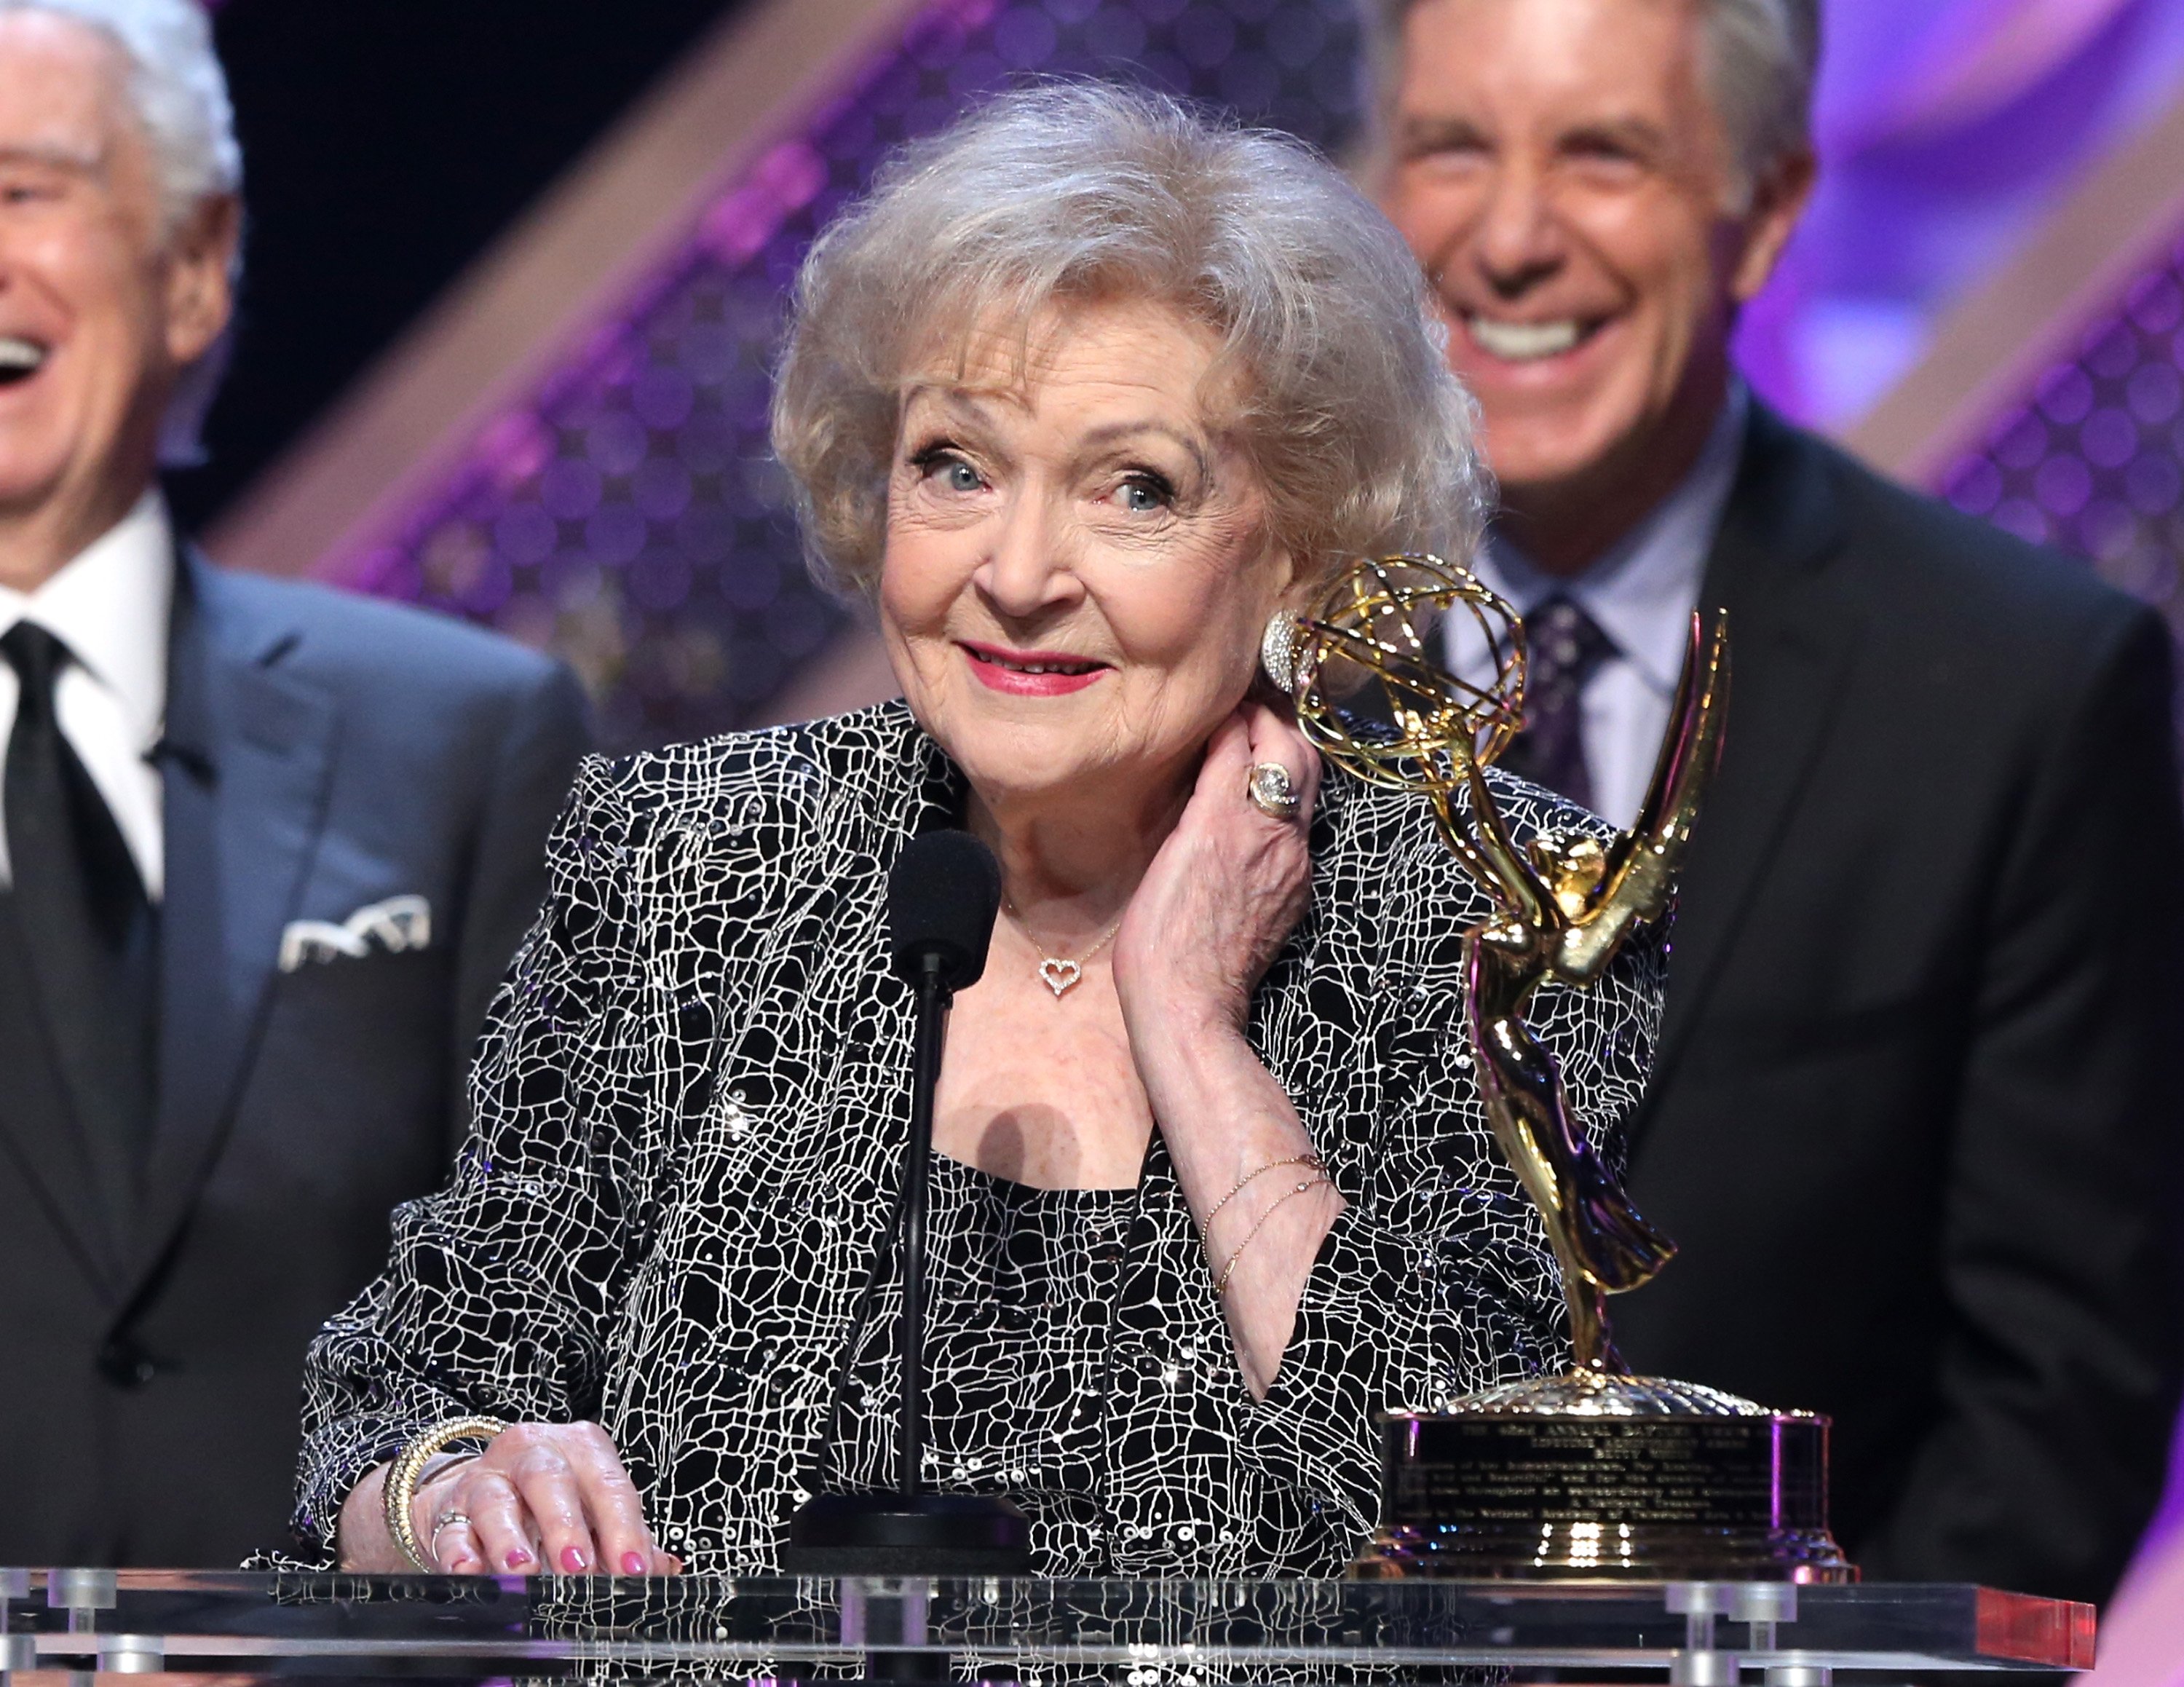 Betty White Has Been Married 3 Times — Meet the 'Golden